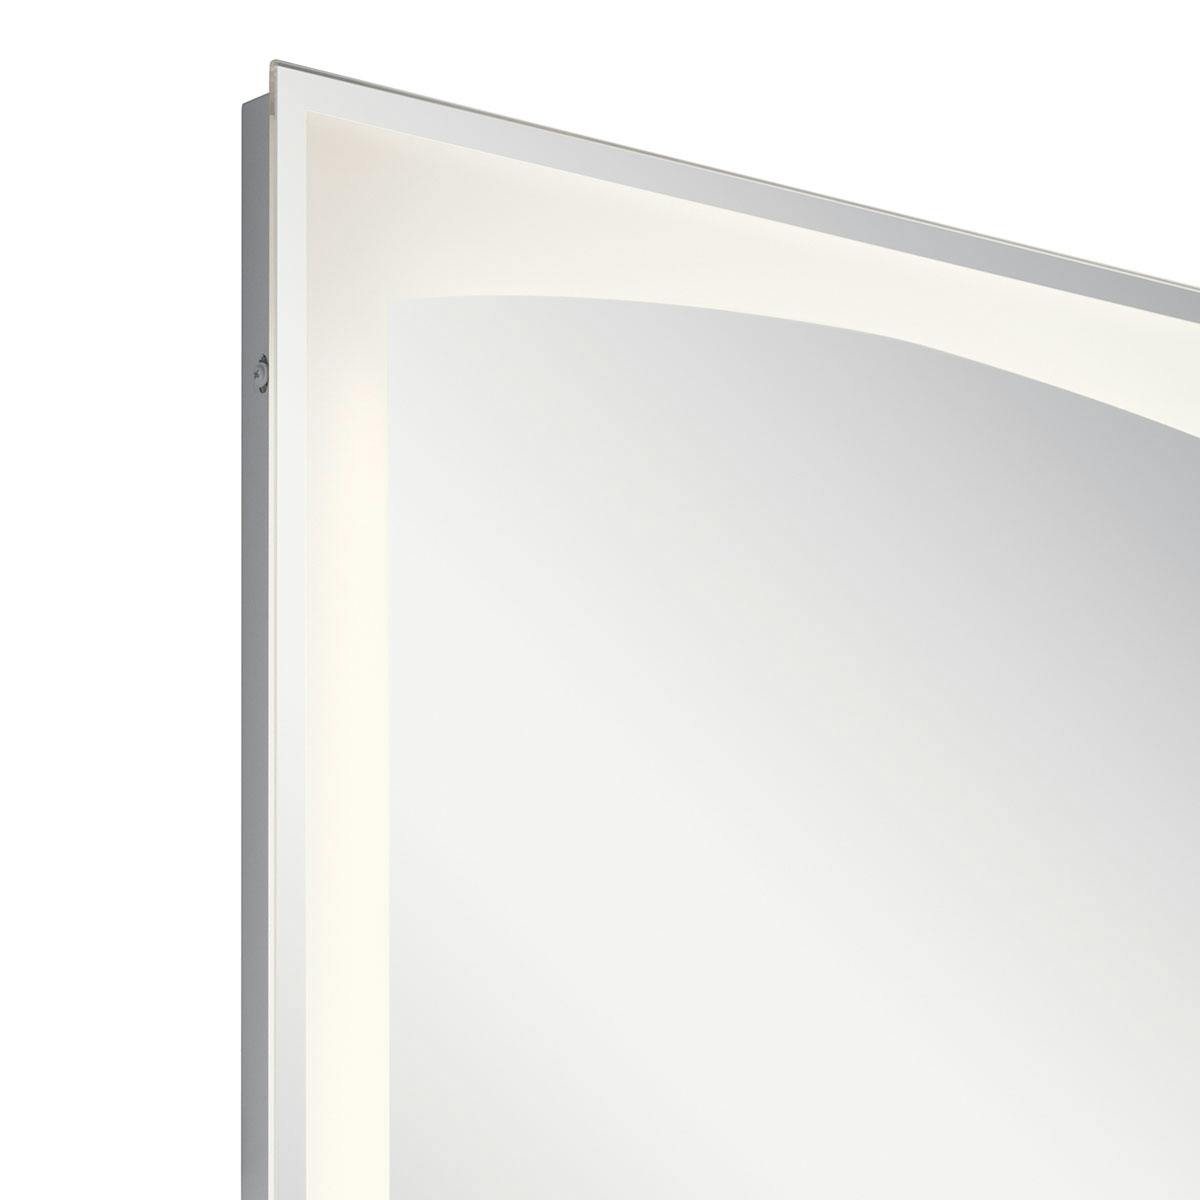 Close up view of the Tyan 30" LED Vanity Mirror White on a white background